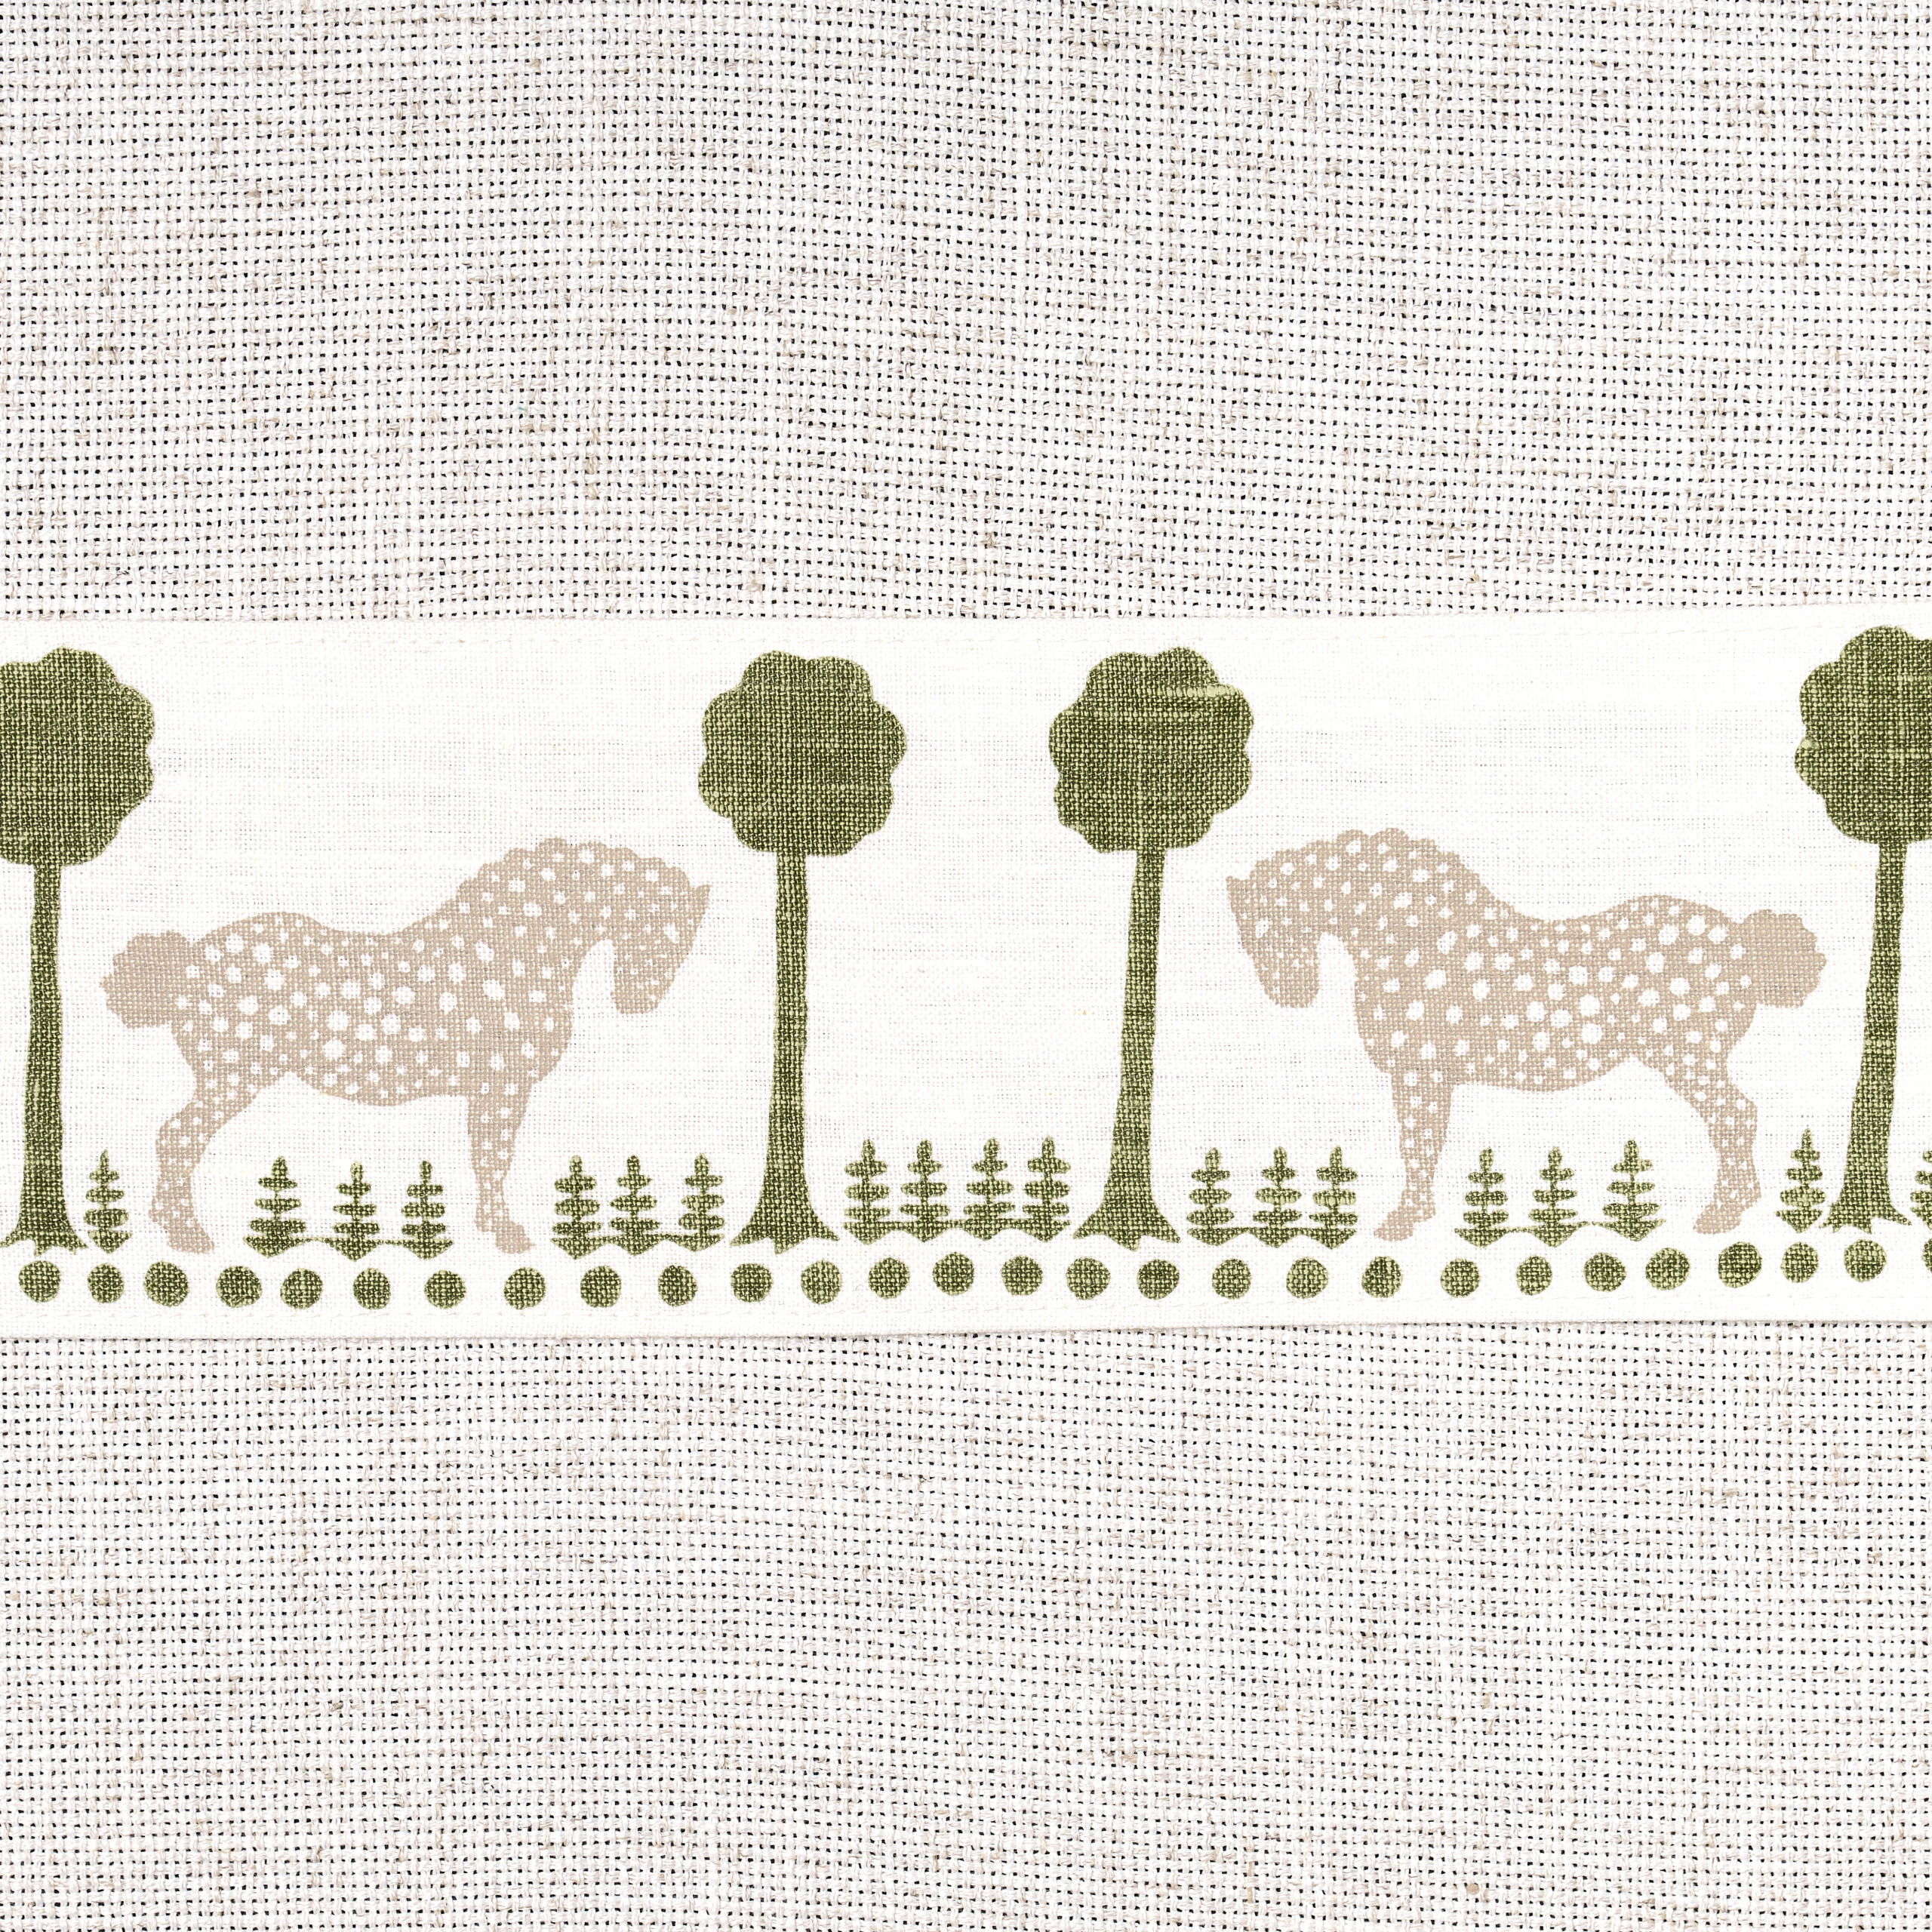 Schumacher Polka Dot Pony Tape in Olive, from the Folly Cove collection